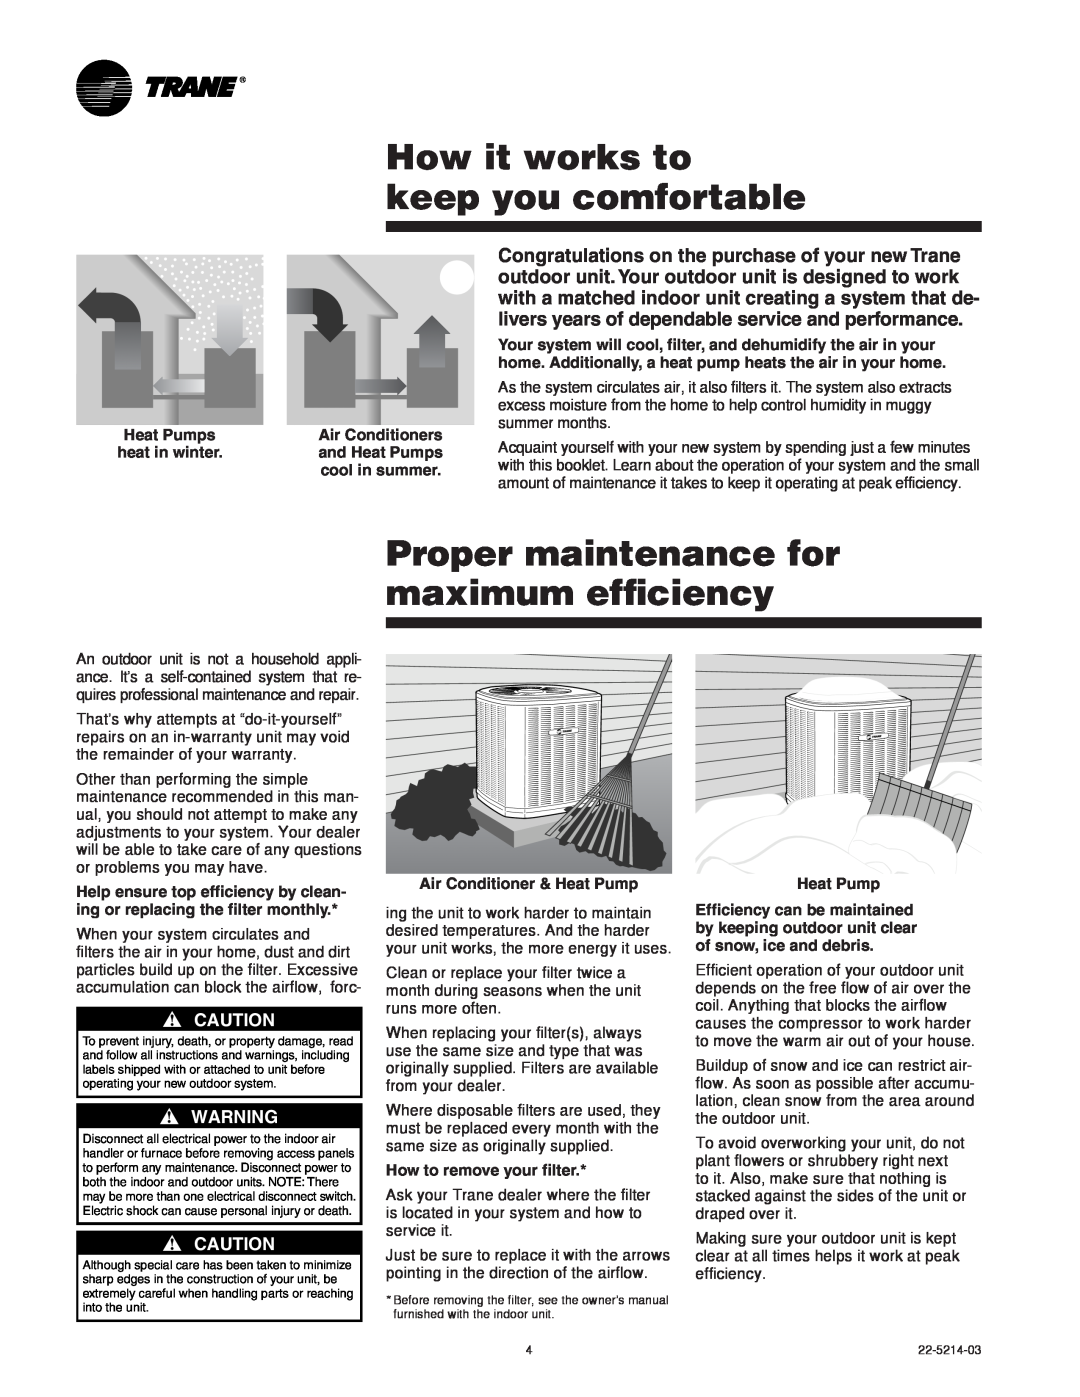 Trane 22-5214-03 manual How it works to keep you comfortable, Proper maintenance for maximum efﬁciency 